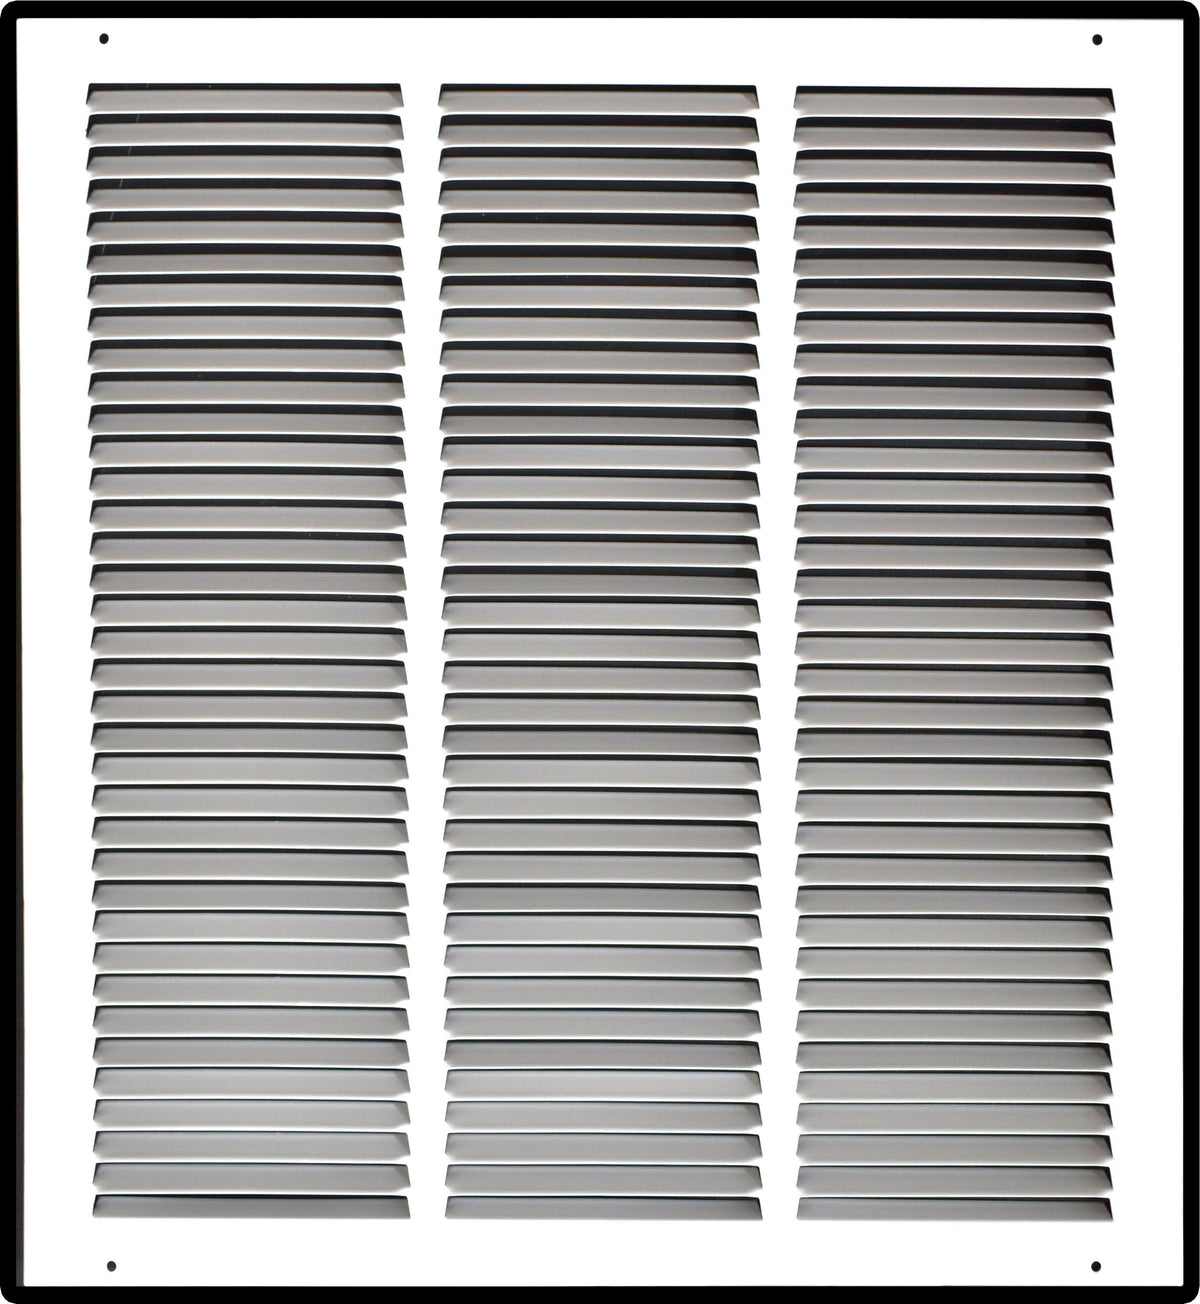 airgrilles 18" x 22" duct opening   steel return air grille for sidewall and ceiling hnd-flt-1rag-wh-18x22 756014647983 - 1